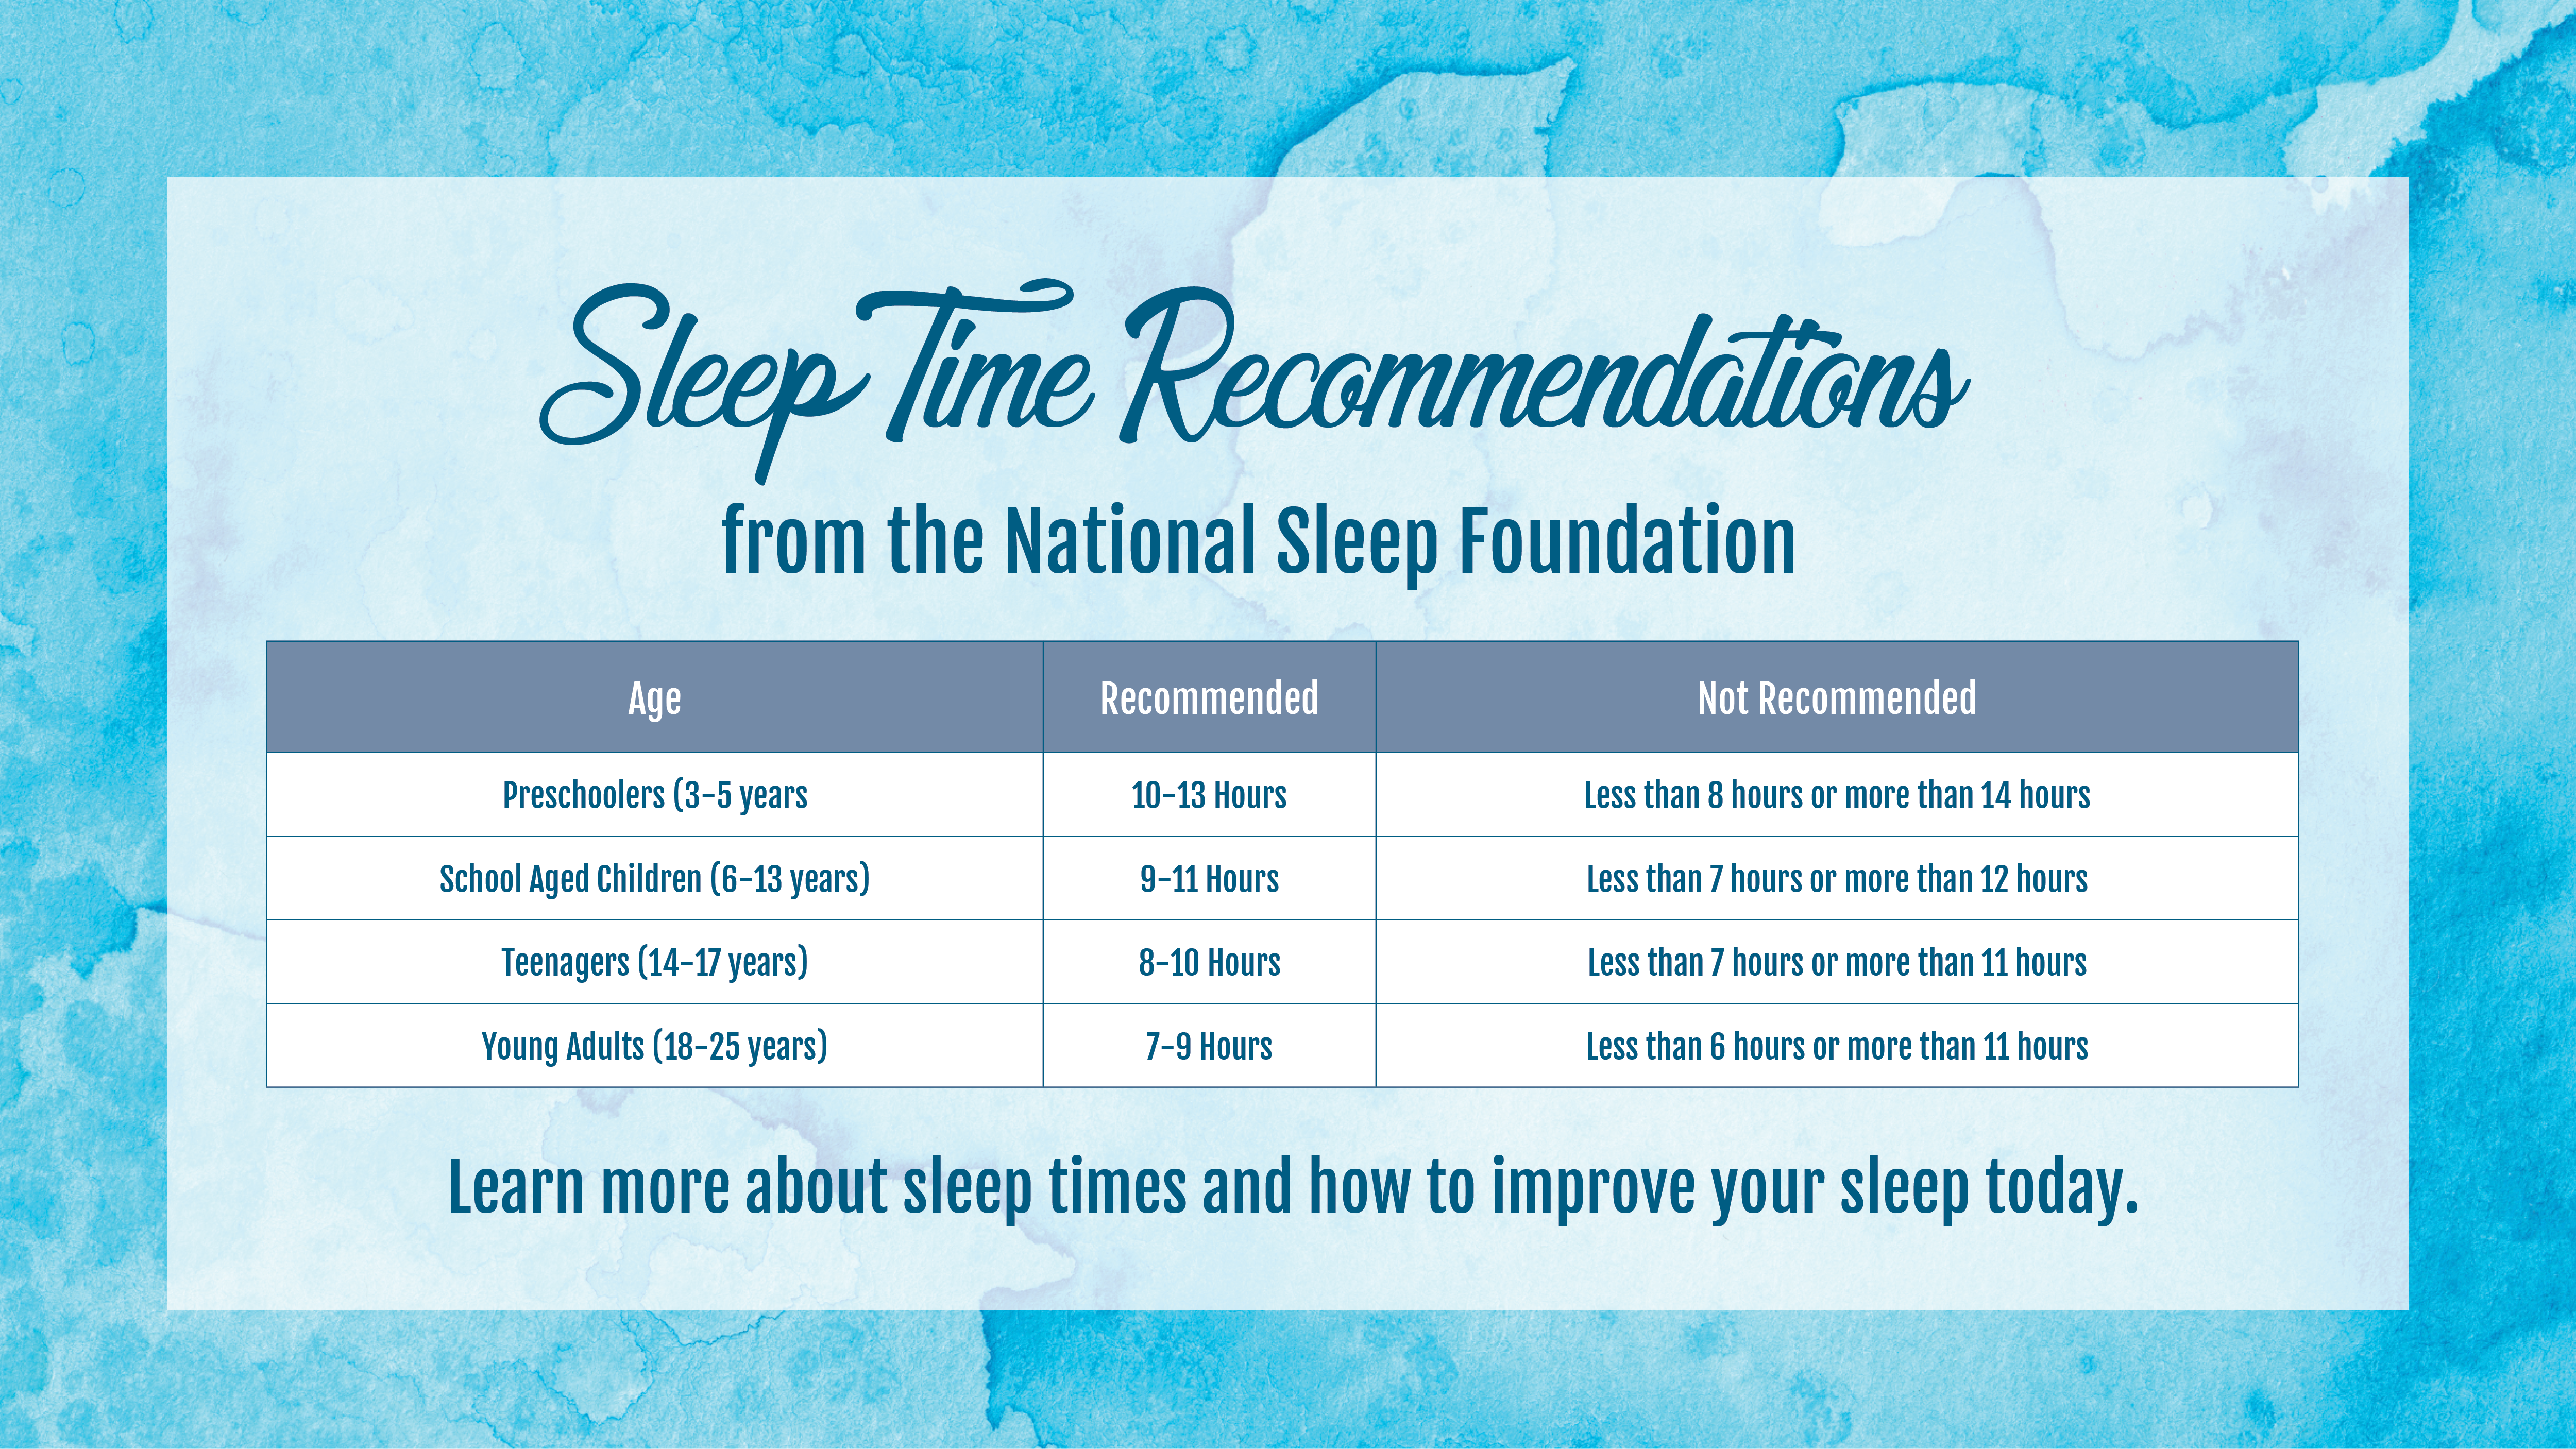 Learn more about sleep times and how to improve your sleep today.